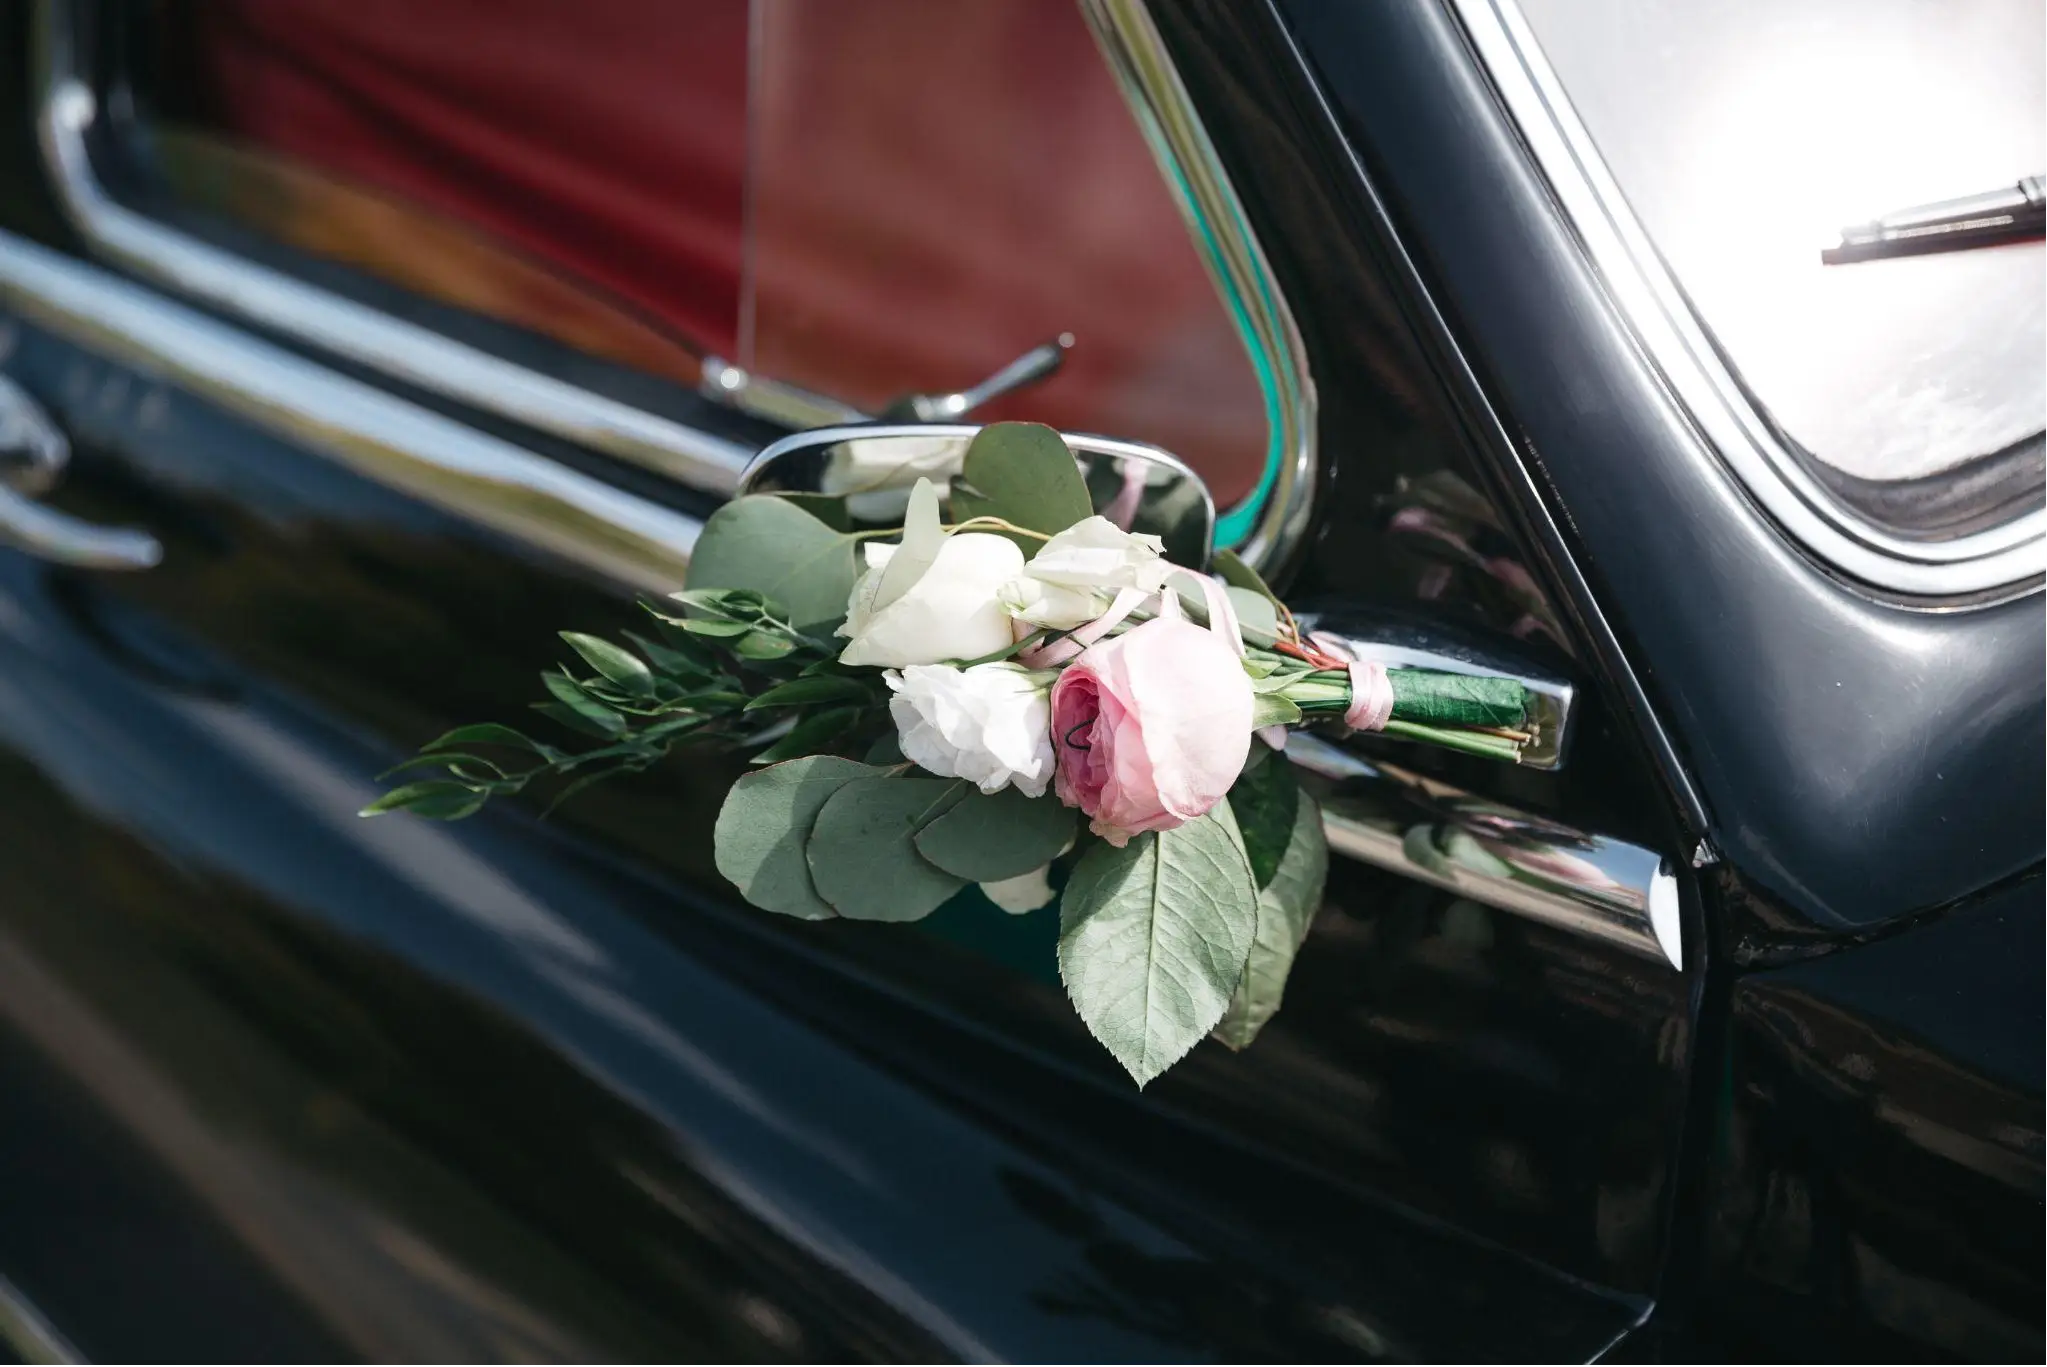 hire a car for wedding